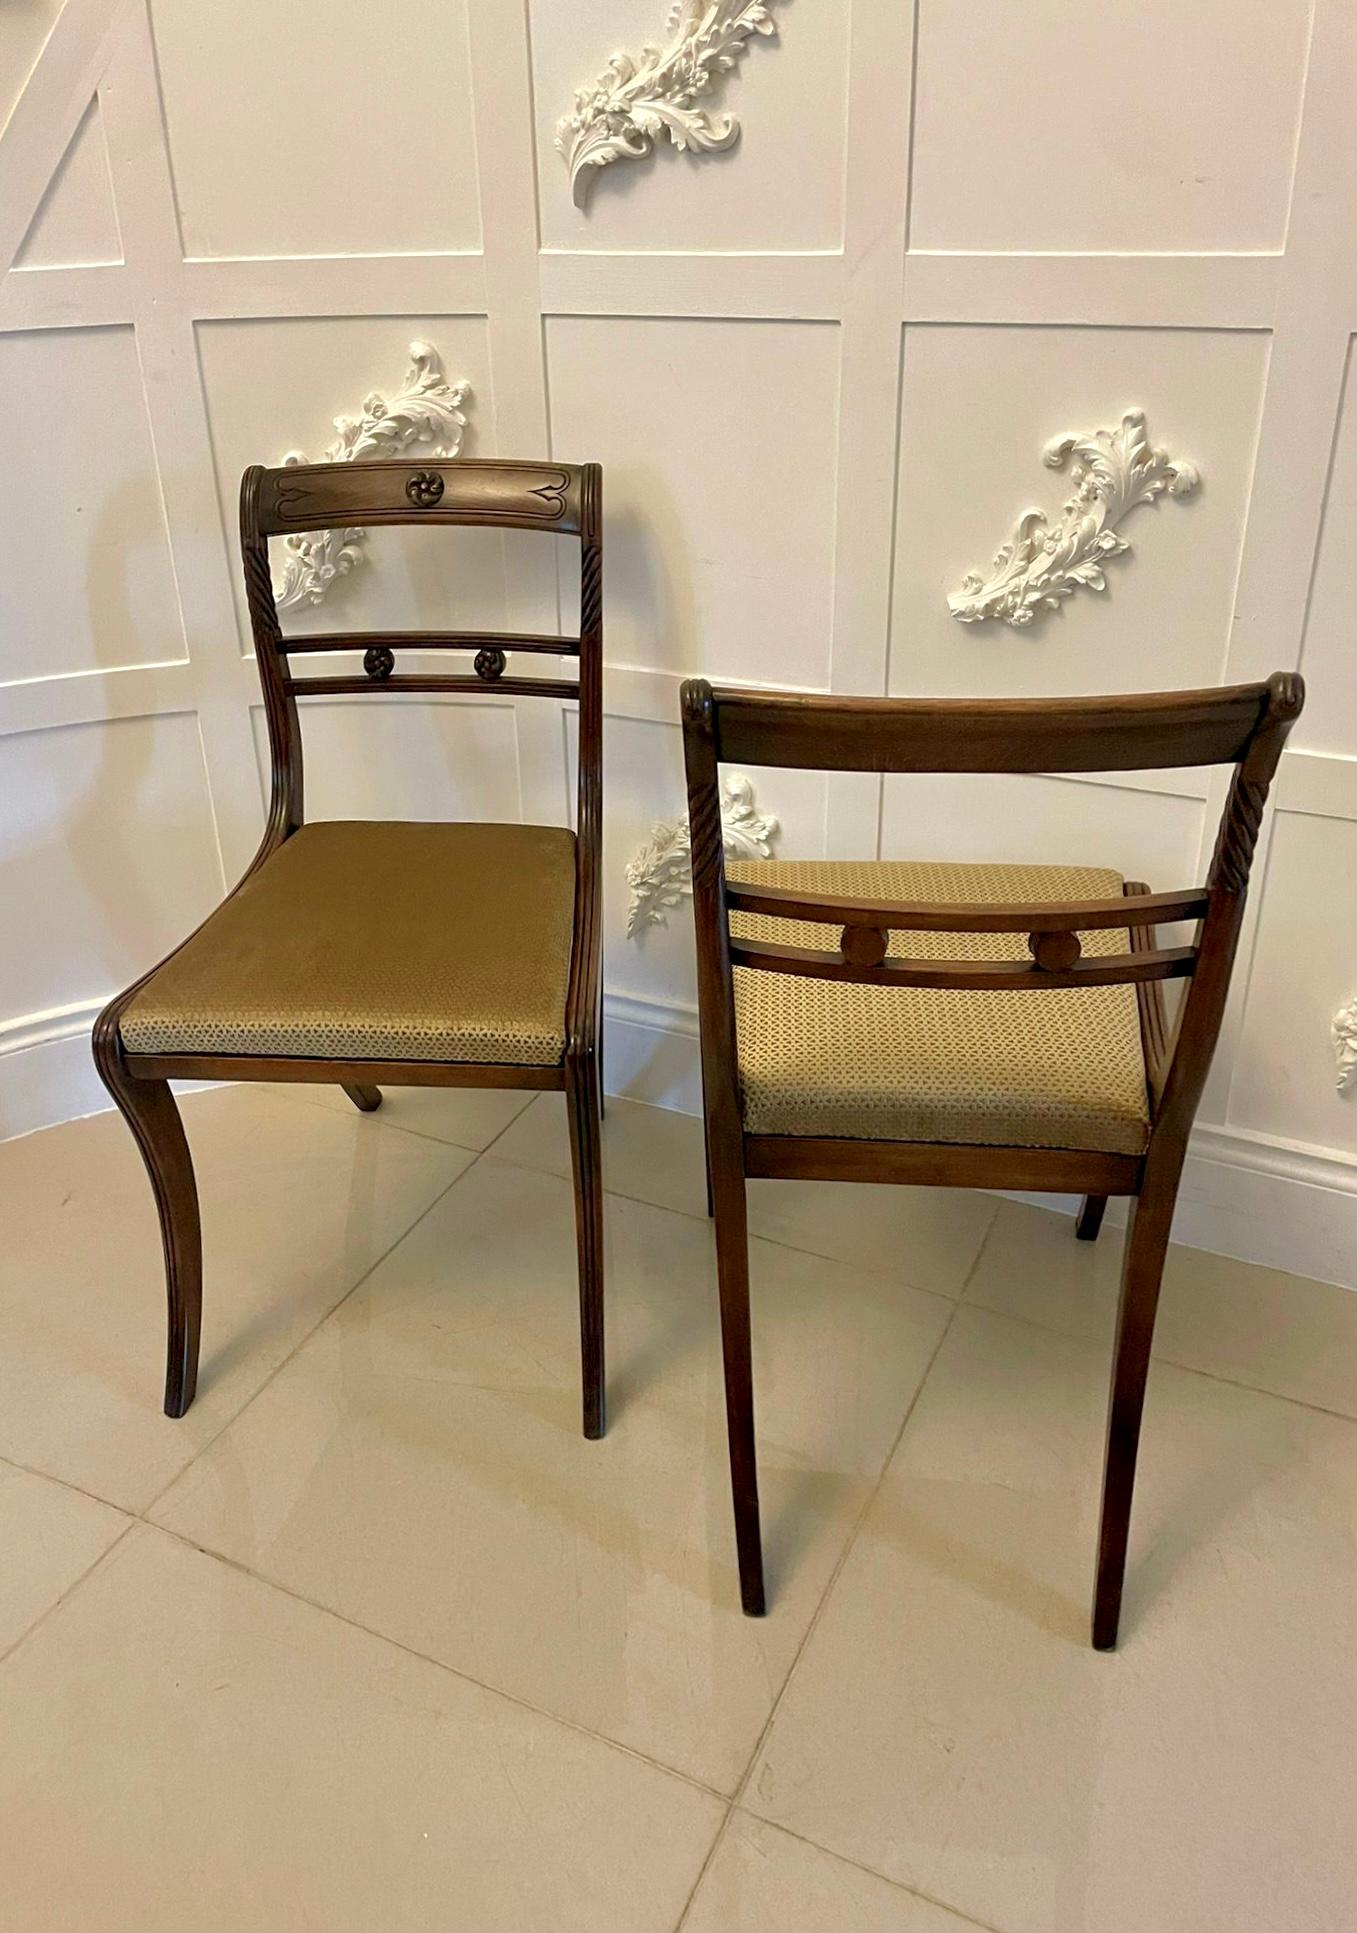  Outstanding Quality Pair of Antique Regency Mahogany Side Chairs  1